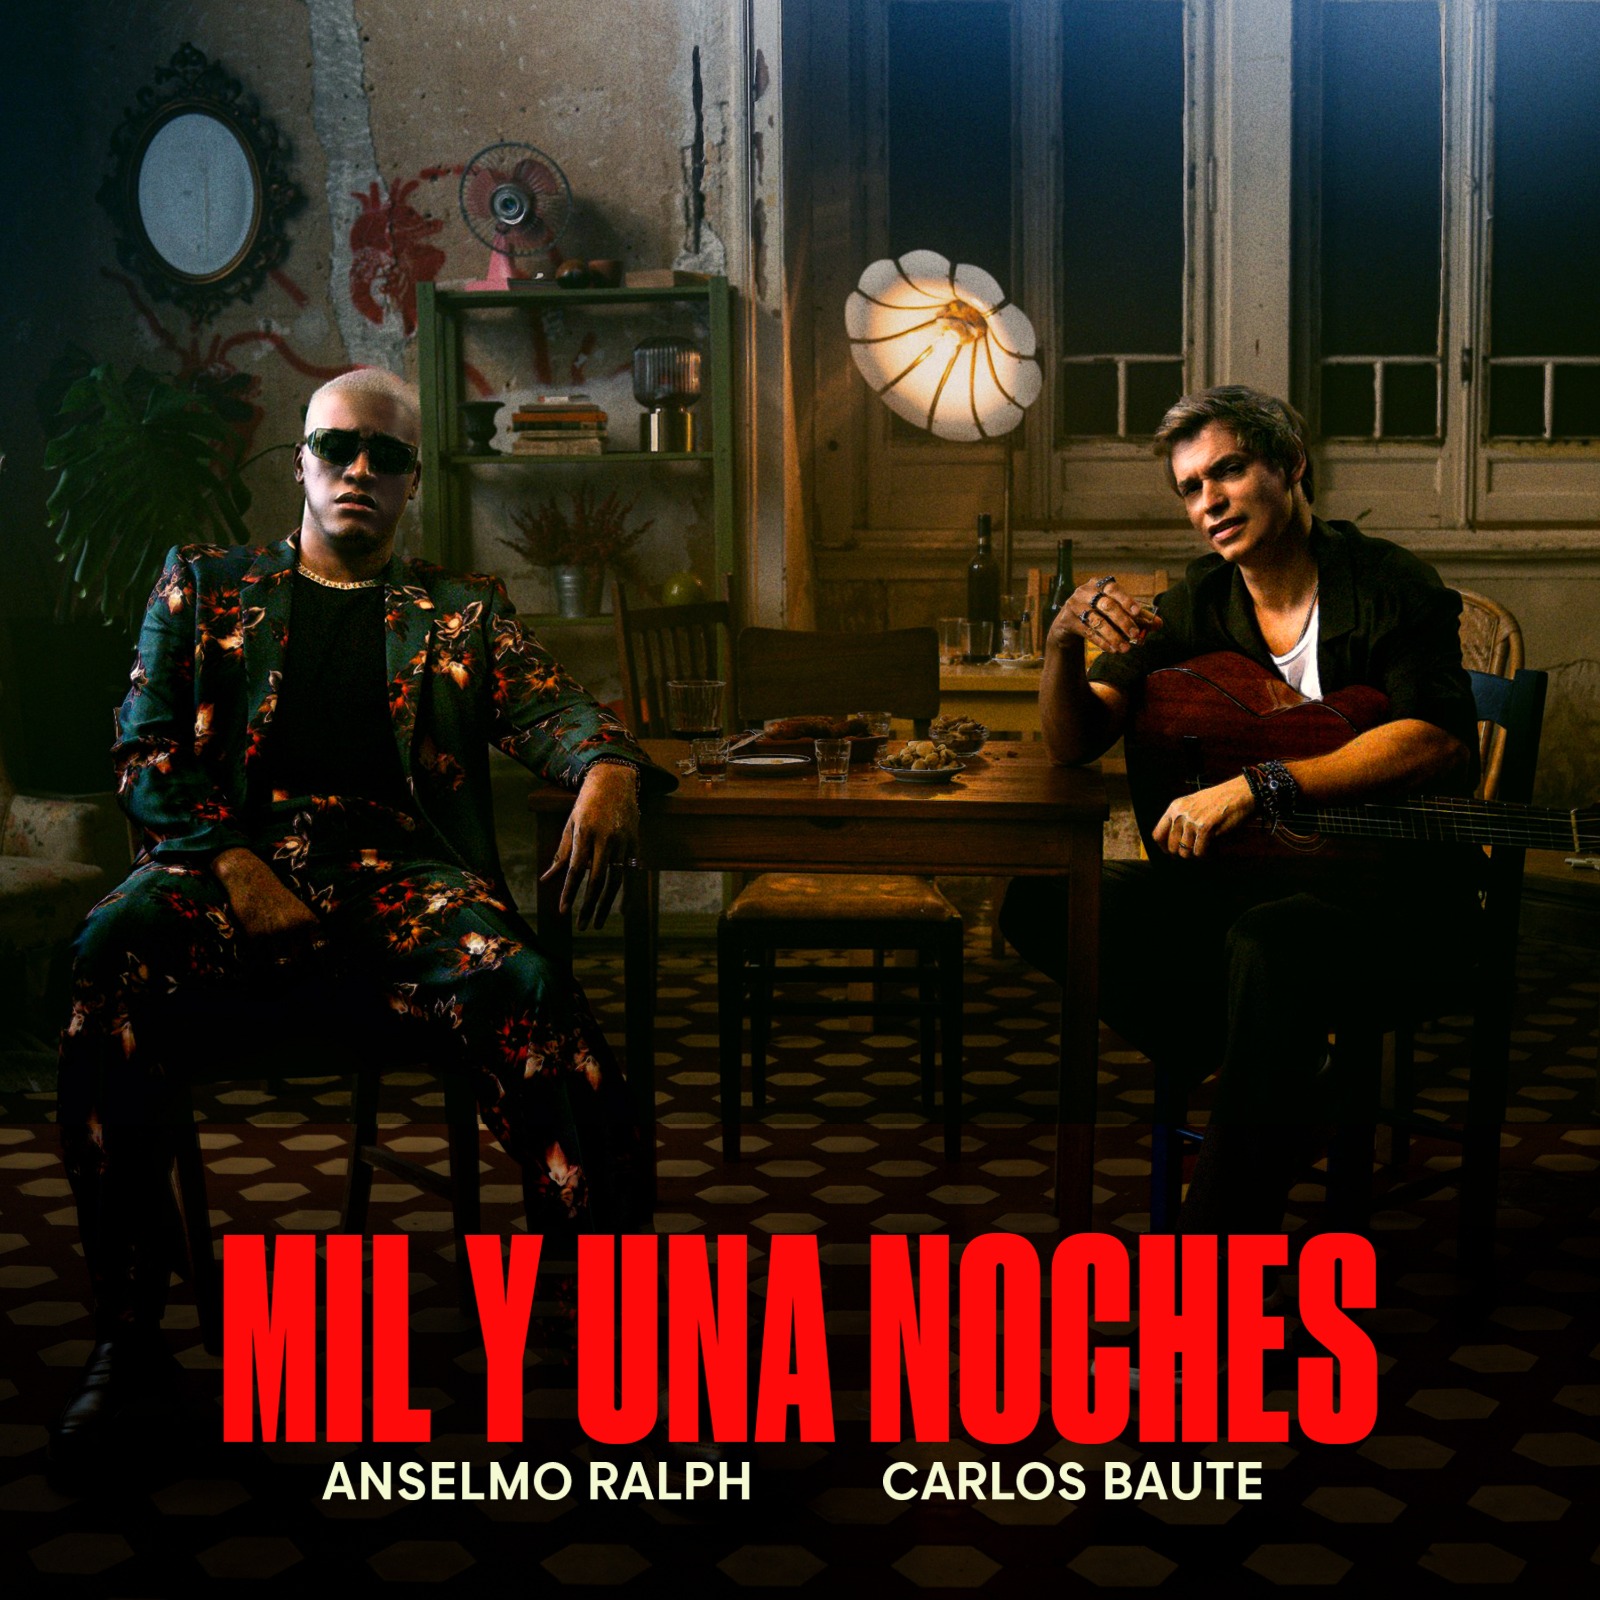 New Single “Mil Y Una Noches” by Anselmo Ralph and Carlos Baute